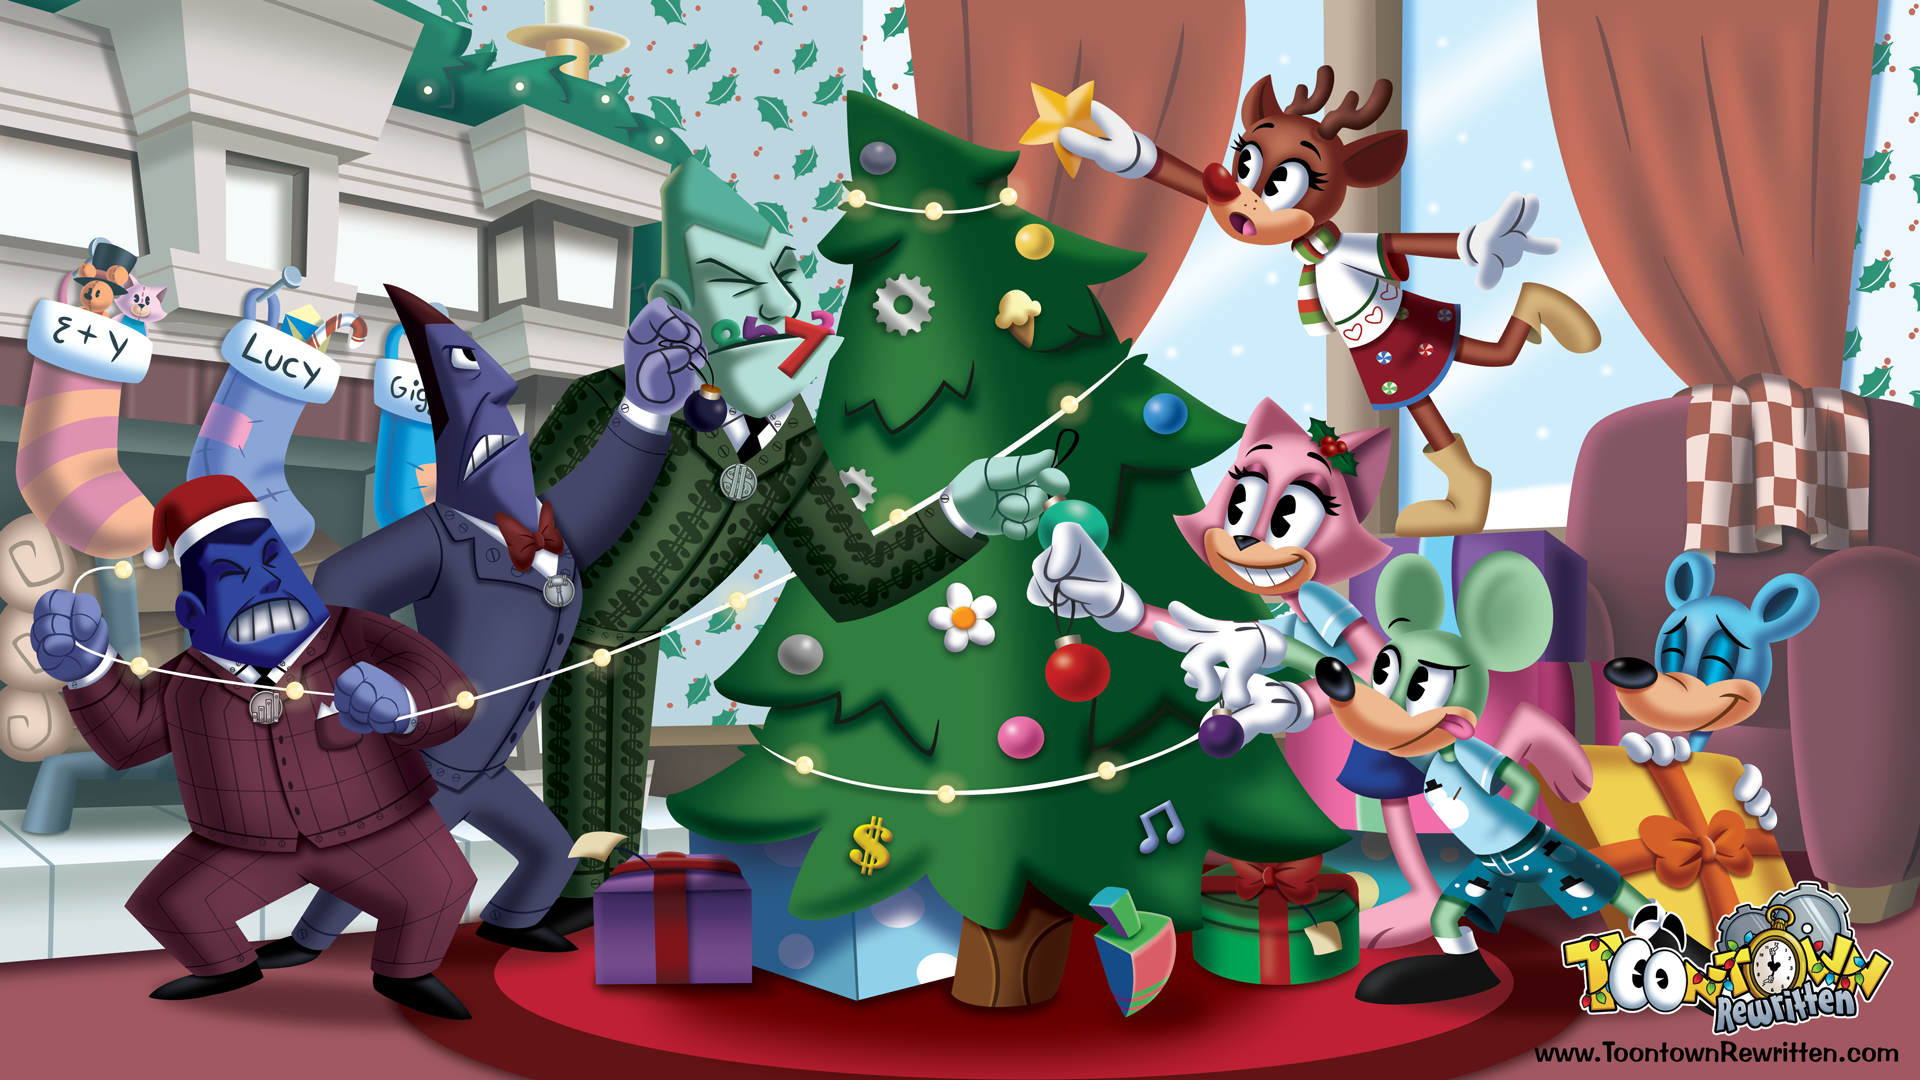 Image: Toontown Holiday Wallpaper. Toons and Cogs are decorating the gag tree for Winter Holidays!